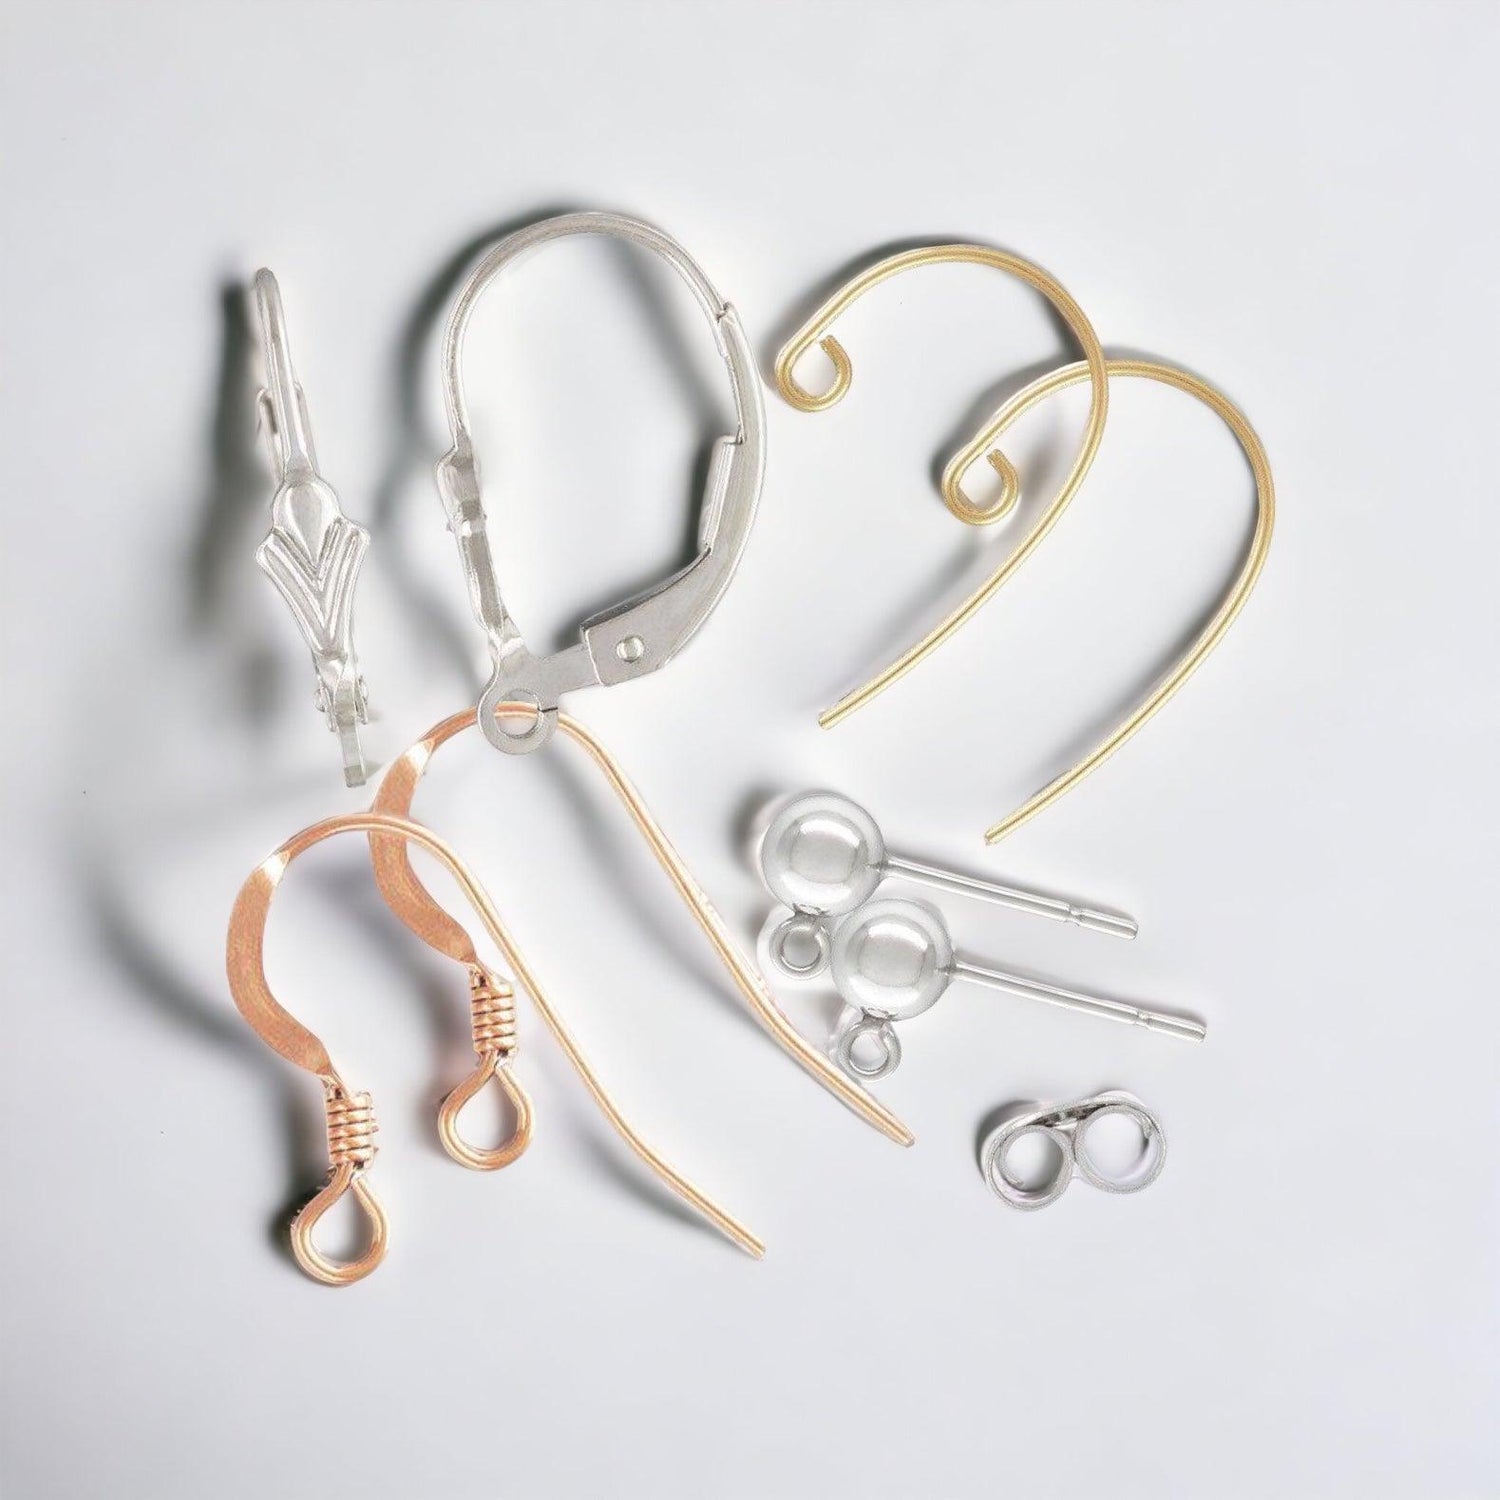 Earring Findings for Jewelry Making - Too Cute Beads